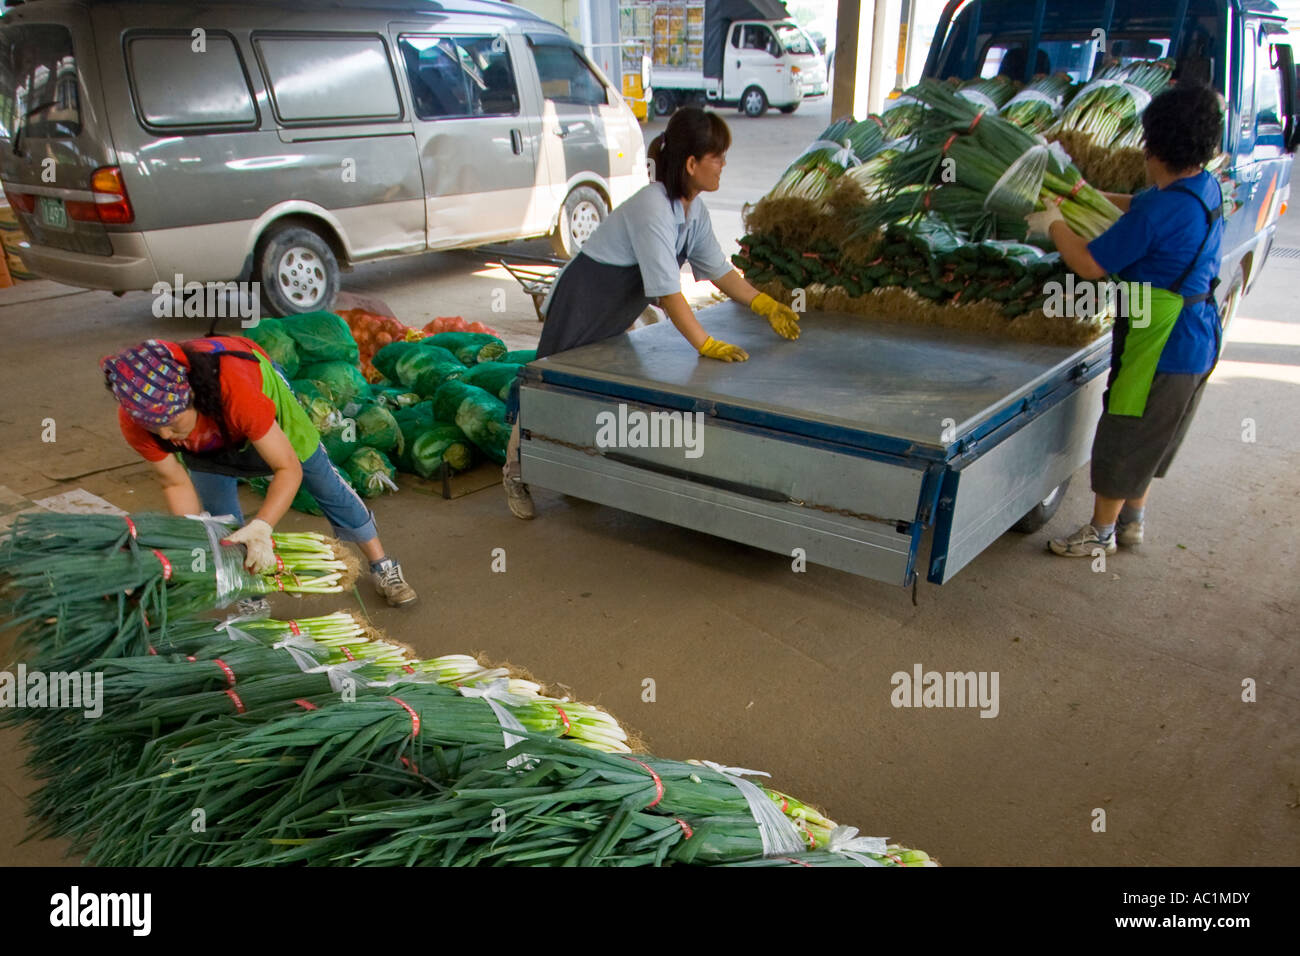 Truckload of Vegetables Co op Produce Consolidator Jecheon Chungcheongbuk Do Province South Korea Stock Photo